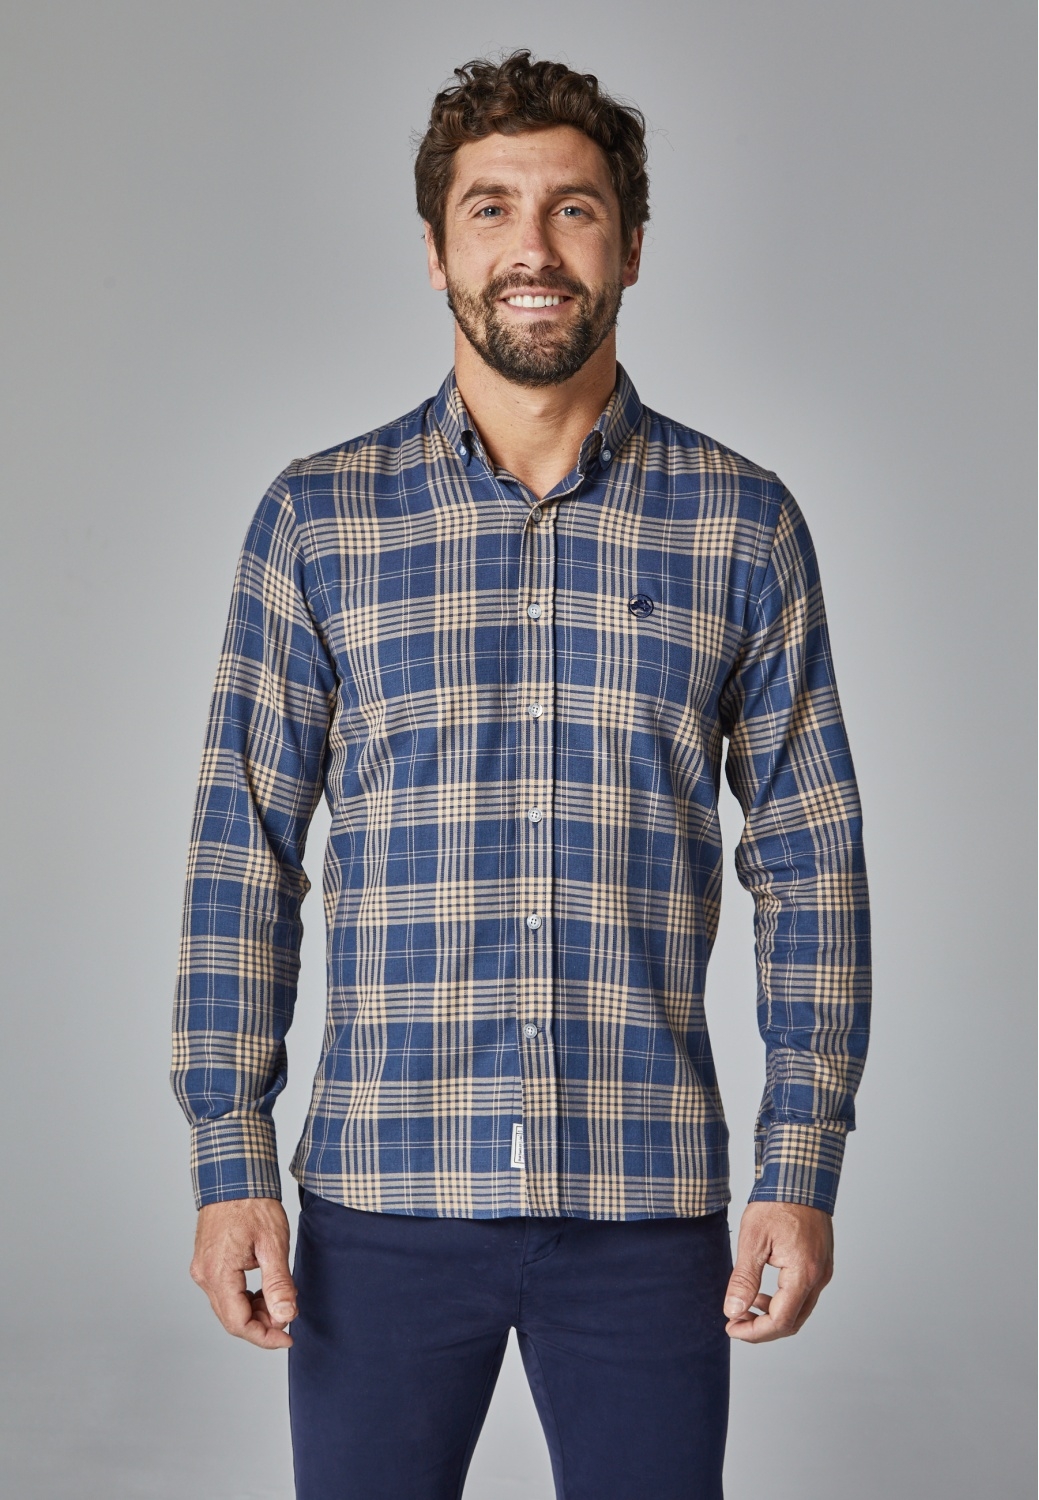 PLAID SHIRT IN BLUE AND BEIGE